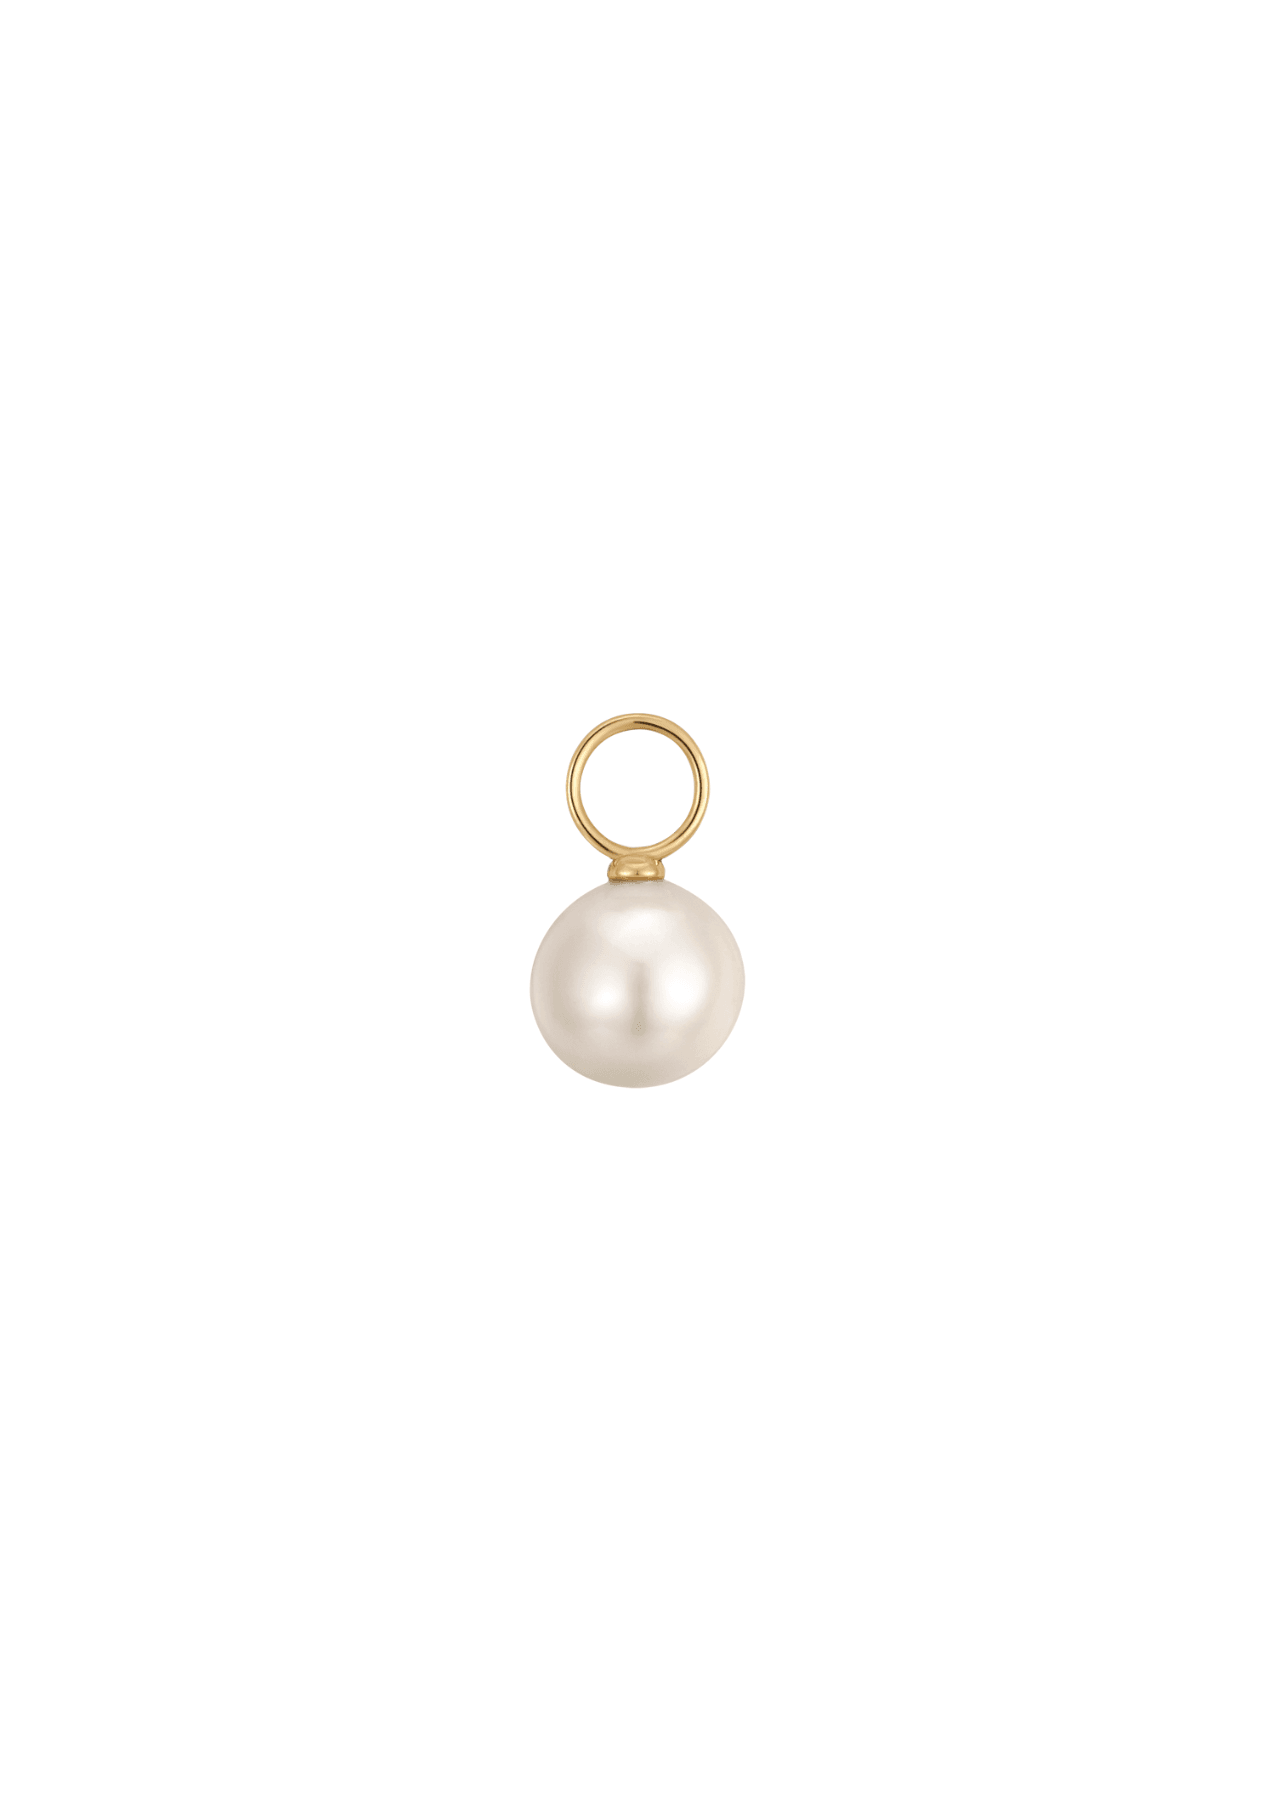 The Snowball Pearl 14ct Gold Vermeil Charm - Molten Store